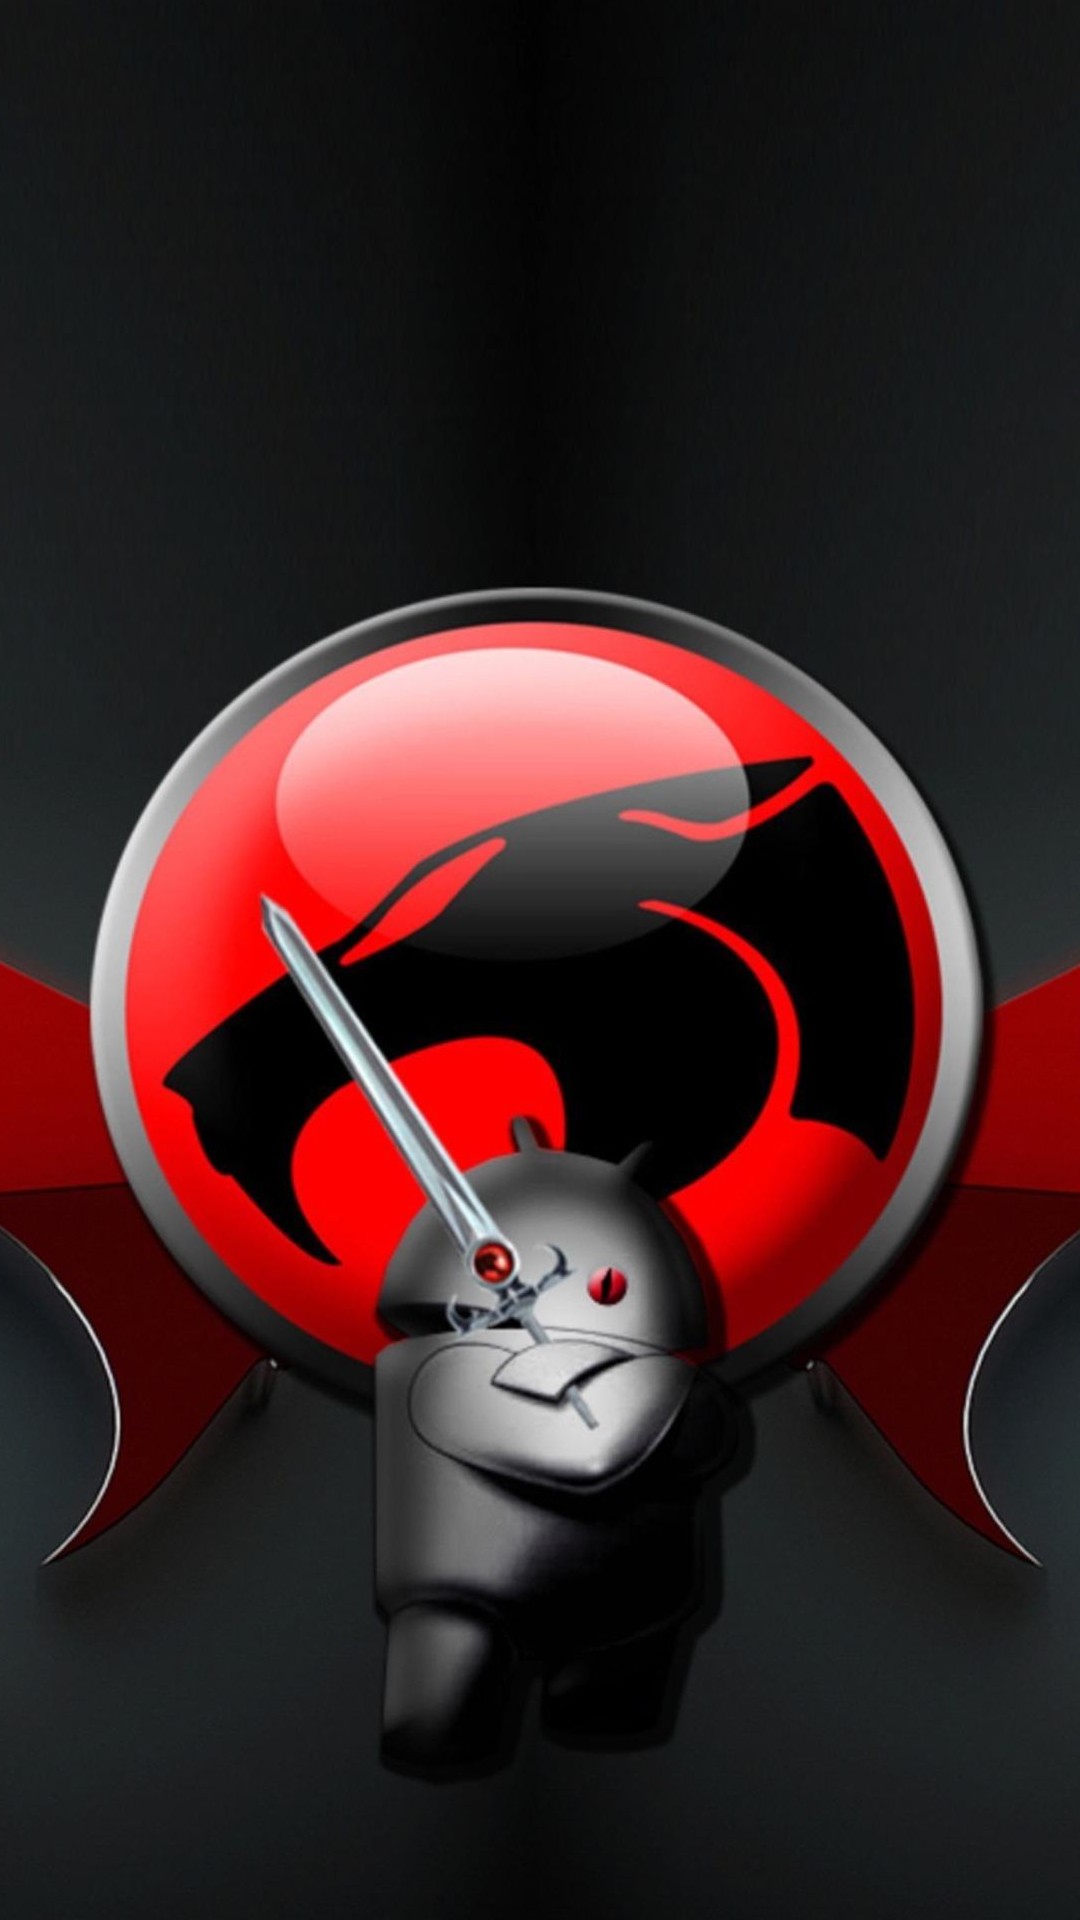 Android Sword Smartphone Wallpapers Hd - Android Hd Black Red - 1080x1920  Wallpaper 